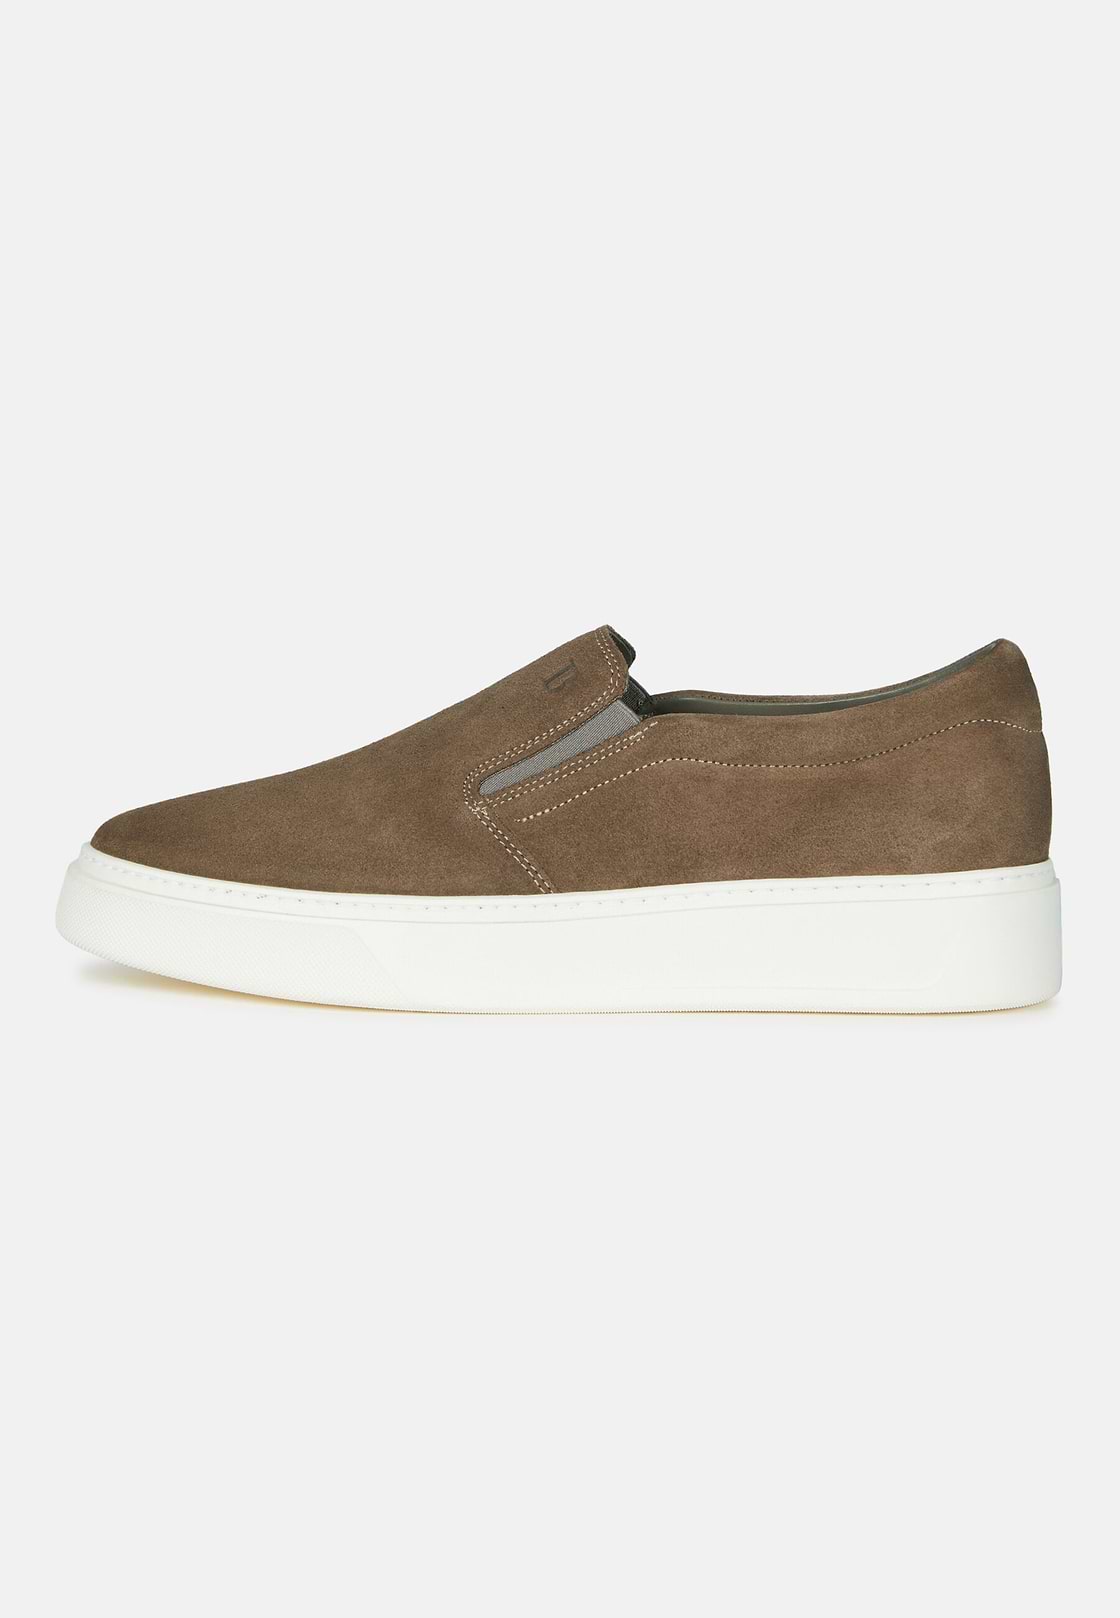 Slip-Ons in Taupe Suede Leather, Taupe, hi-res